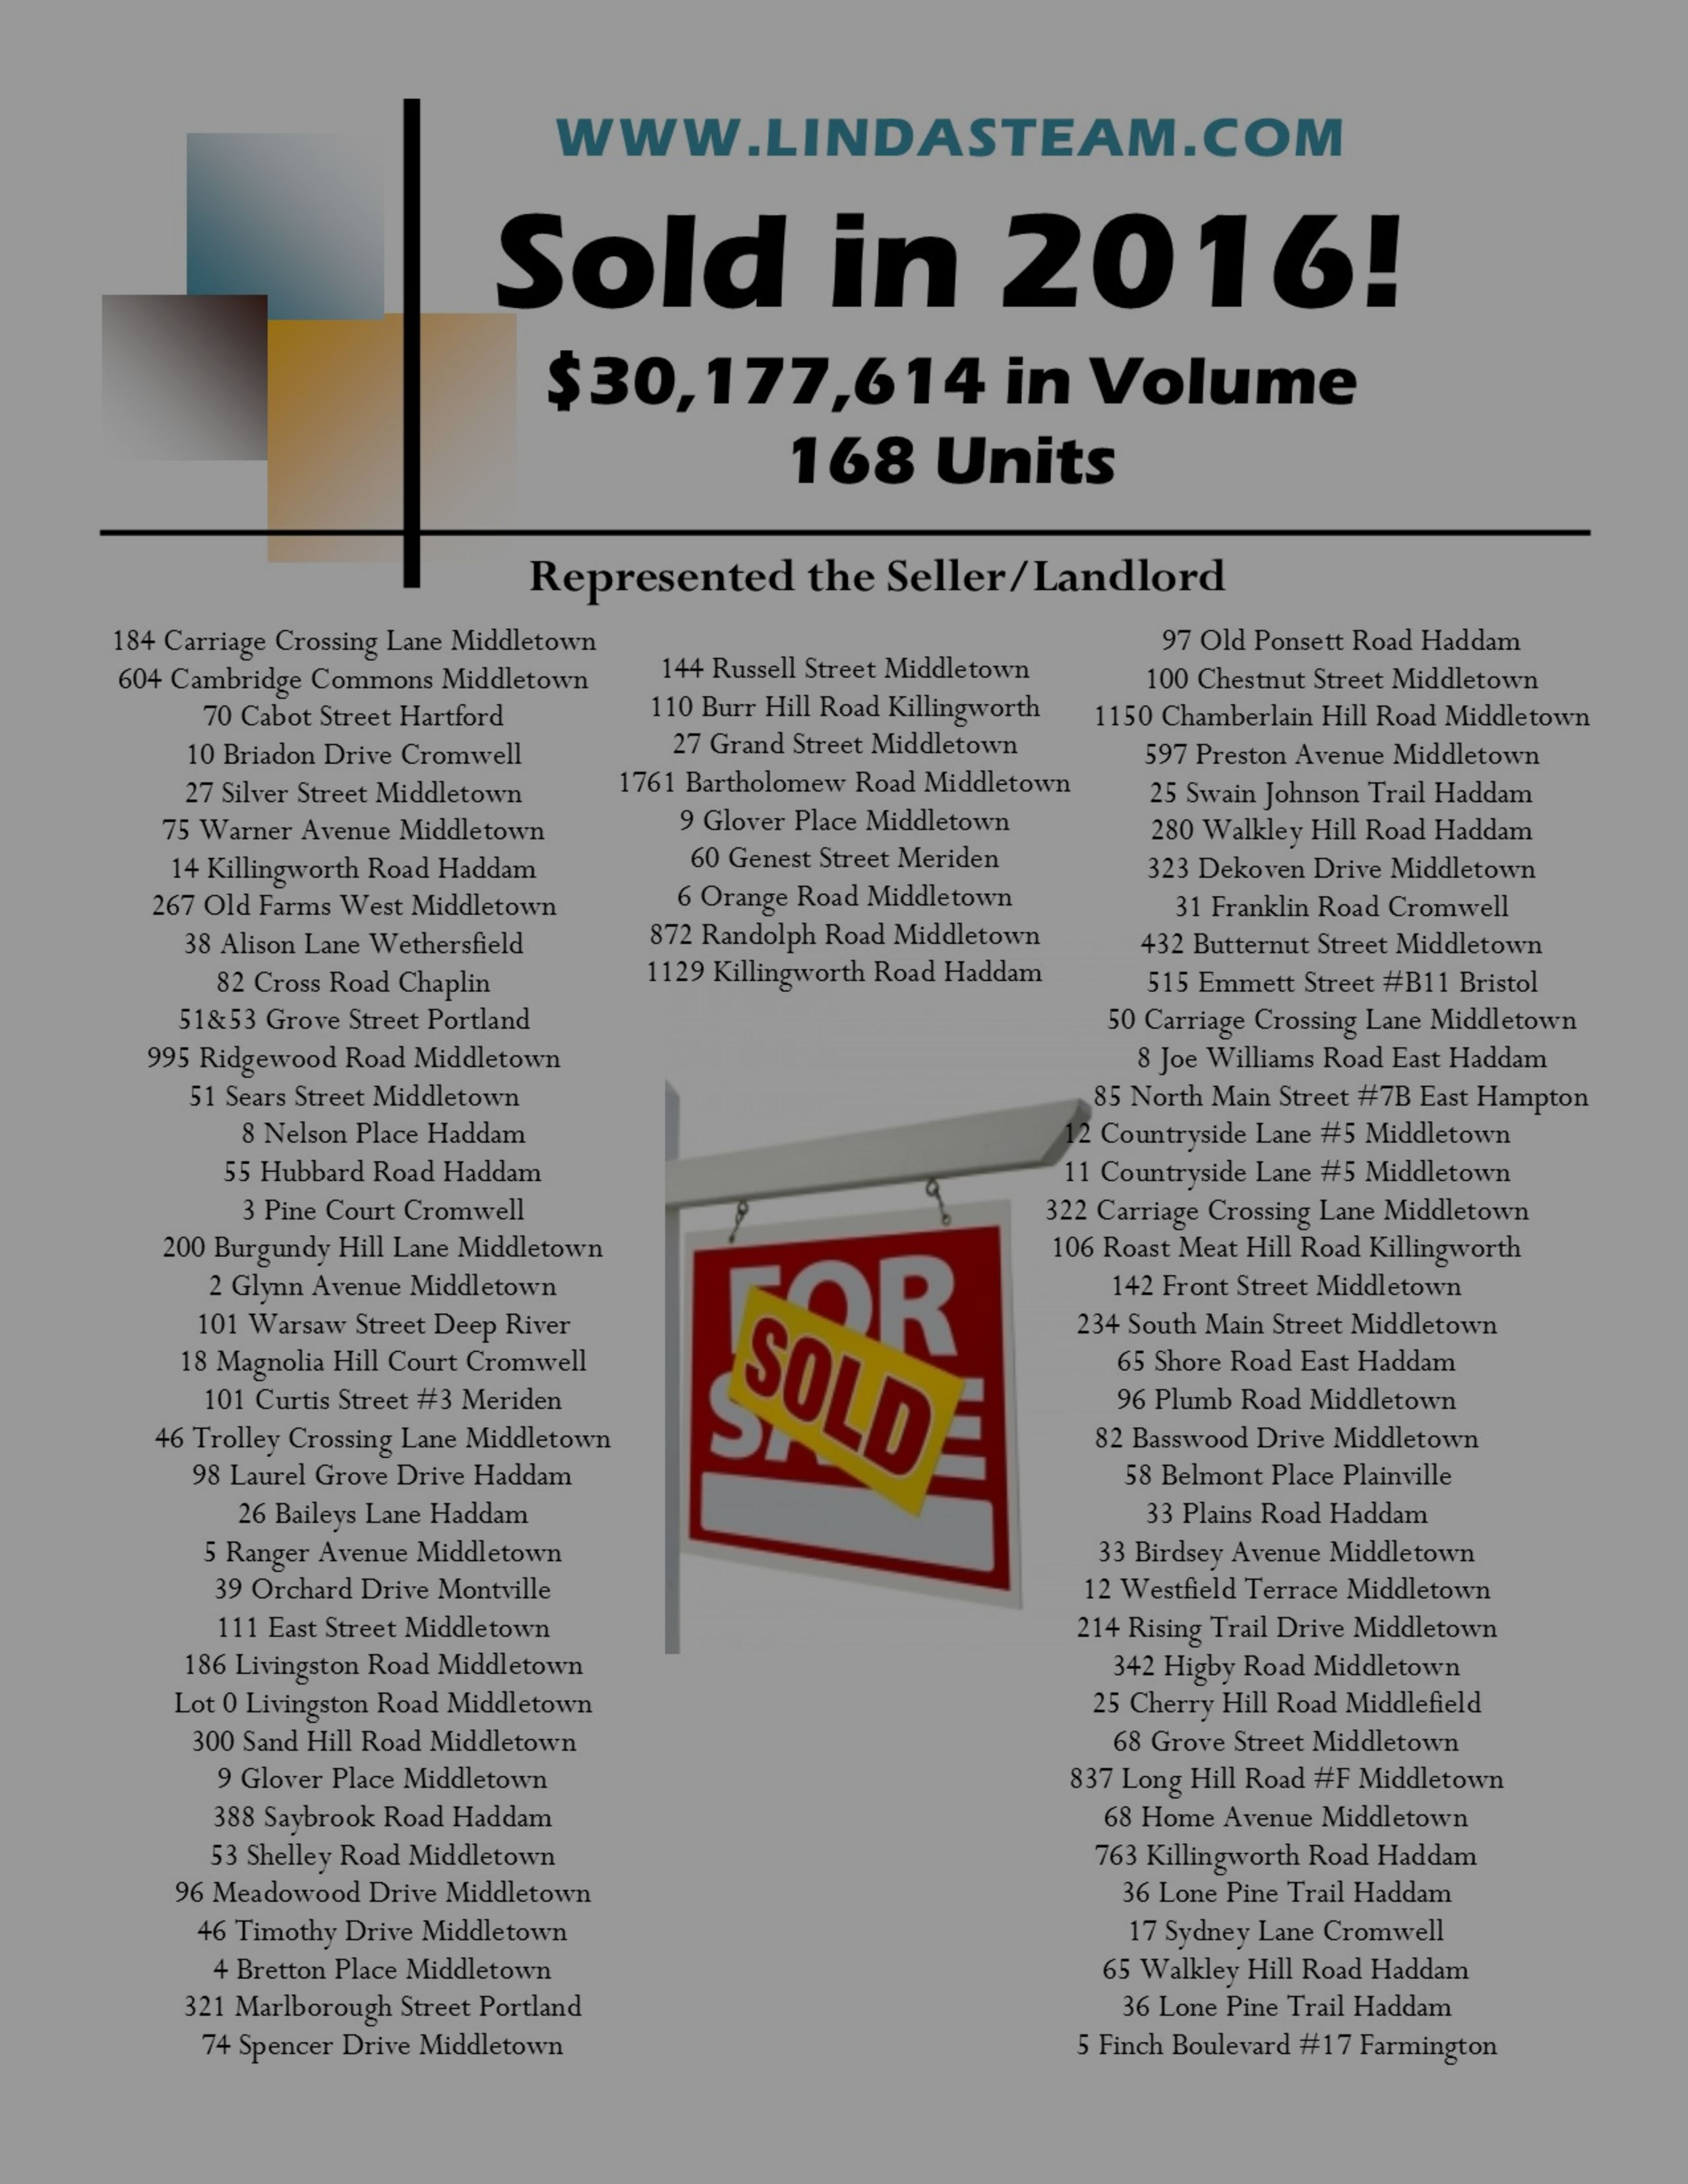 Our 2016 Sellers/Landlords